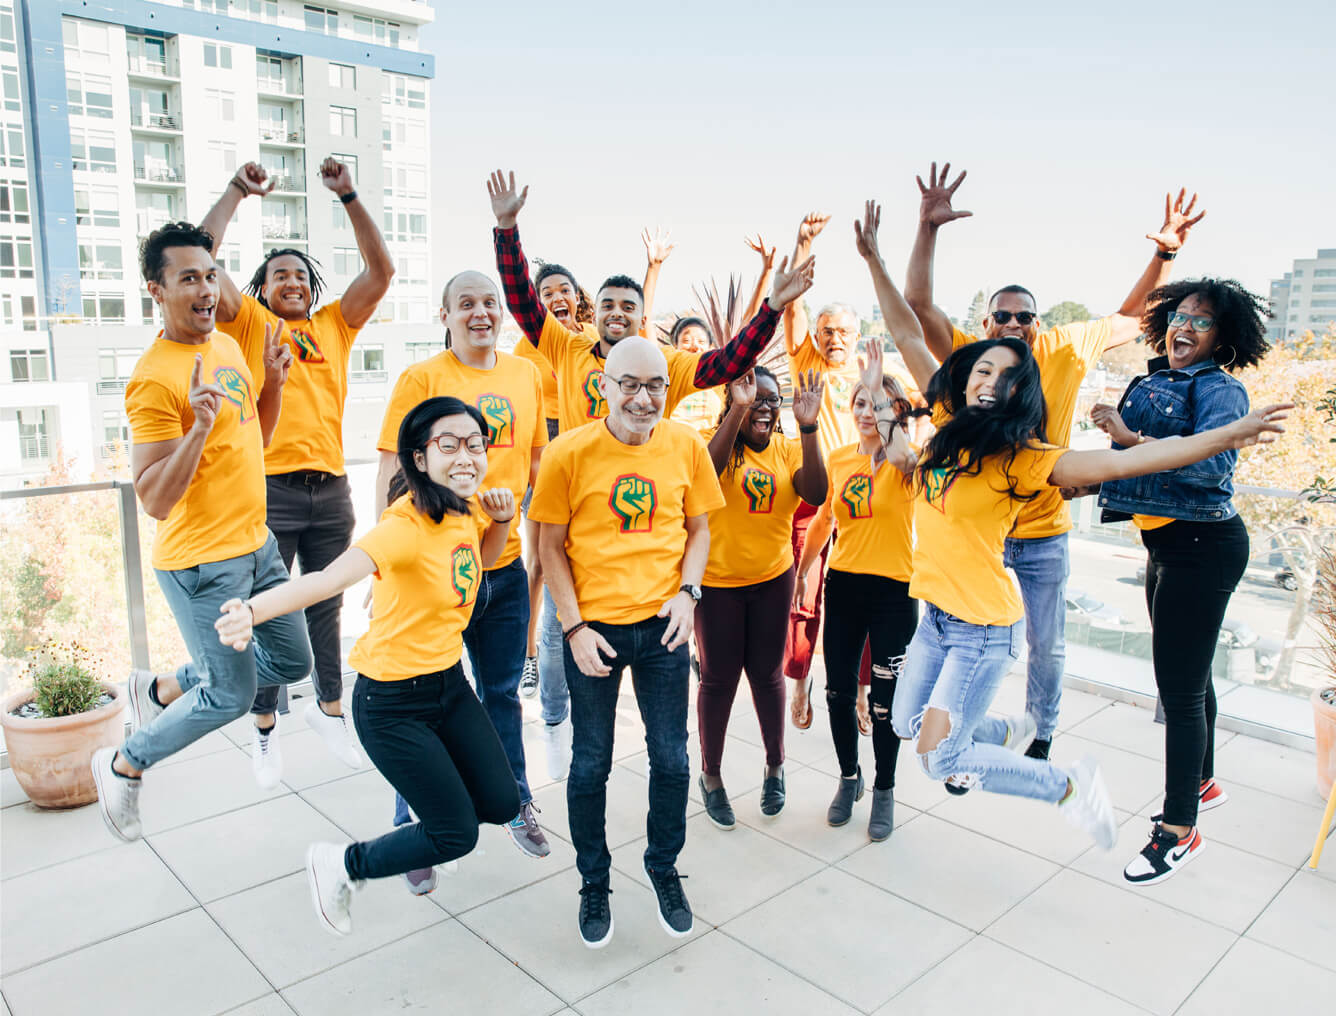 Group of CZI employees in symbolic power fist t-shirts, smiling and leaping in the air before heading out to AfroTech (Diversity, Equity, and Inclusion).